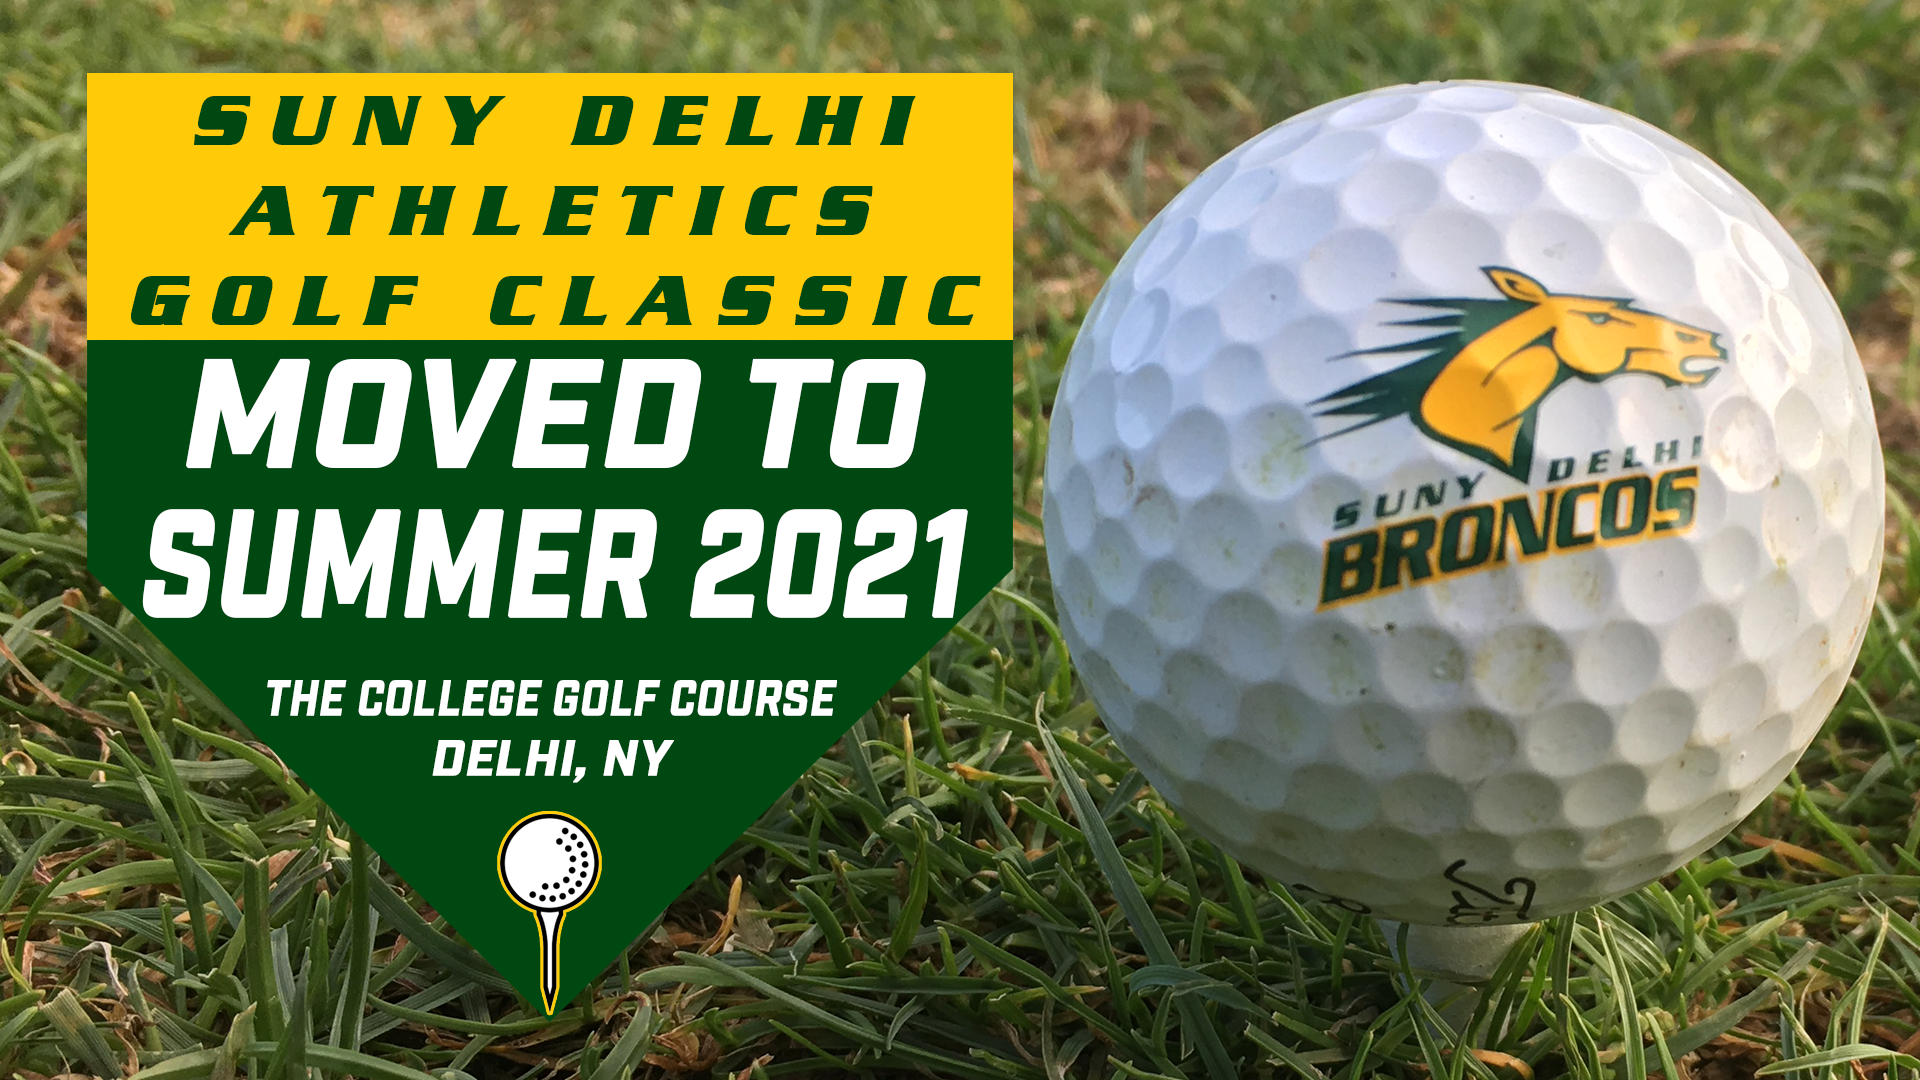 First Athletics Golf Classic Moved to Next Summer